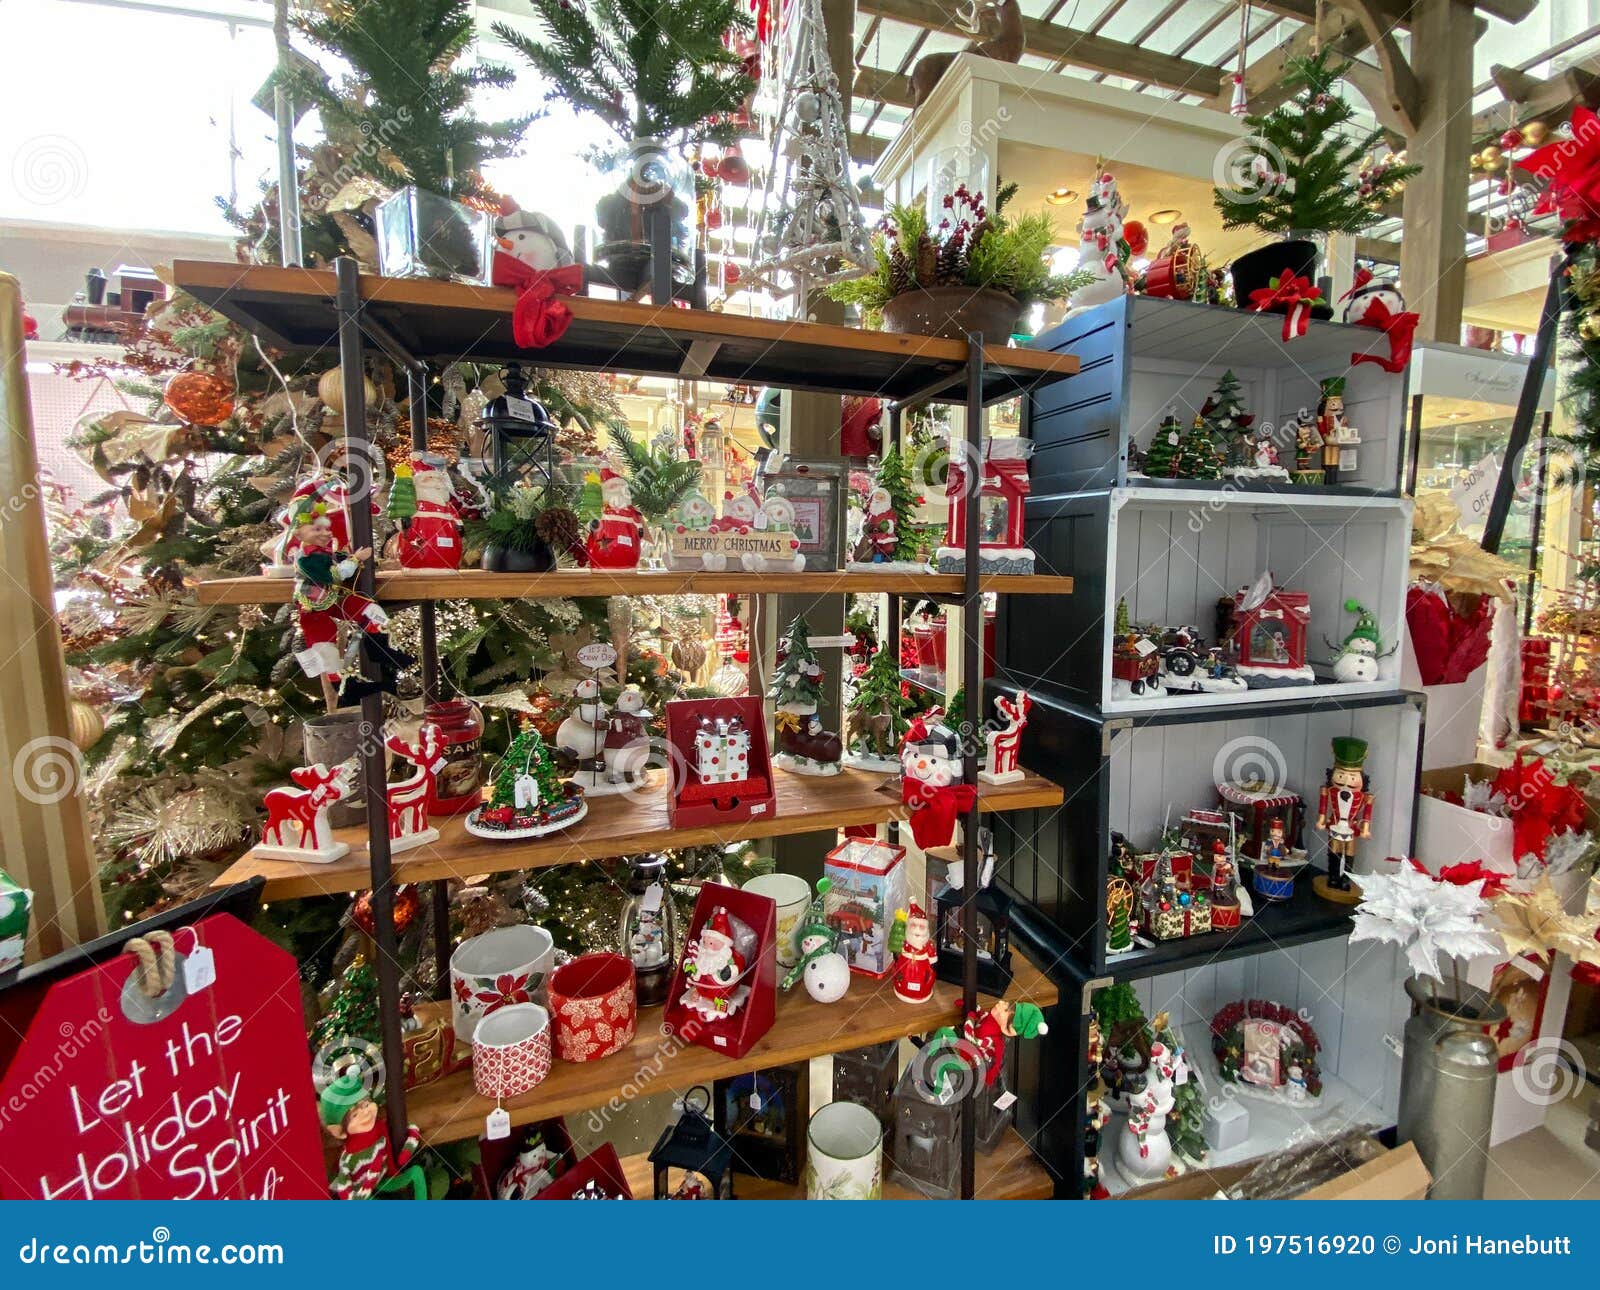 New Ace Hardware Christmas Decorations with Simple Decor